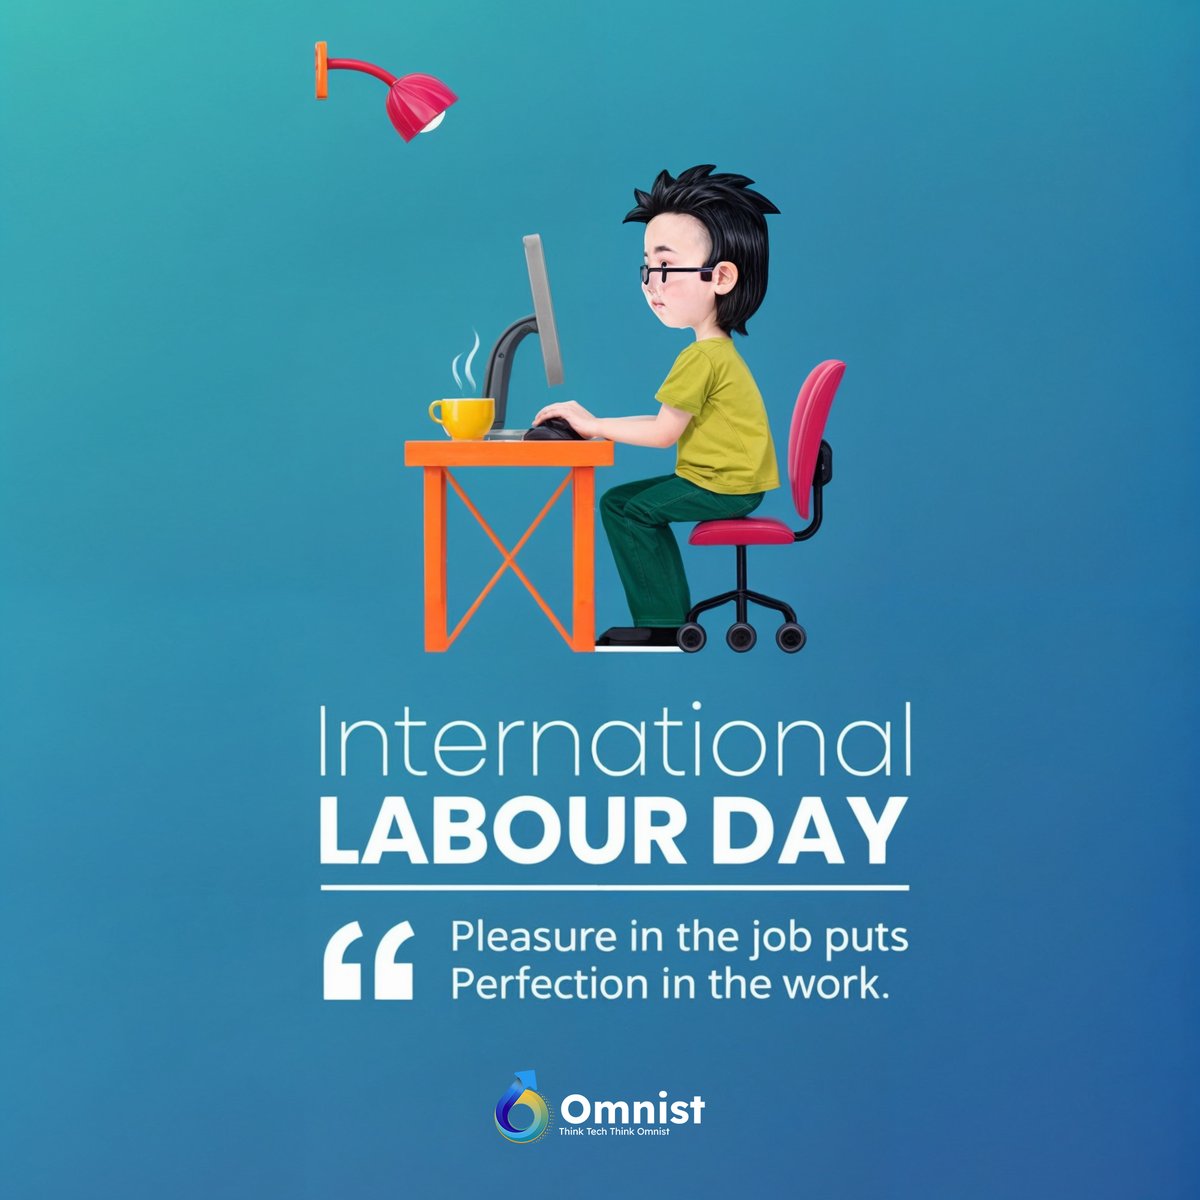 Pleasure in the job puts perfection in the work.
Happy Labour Day! 👩‍💻‍👩‍🔧👩‍🔬👩‍⚖️

#labourday #LabourDay2024 #workerday #1may #1may2024 #LabourRights #mayday #may #labour #labourdayweekend #workersday #workers #happylabourday #internationalworkersday #internationallabourday